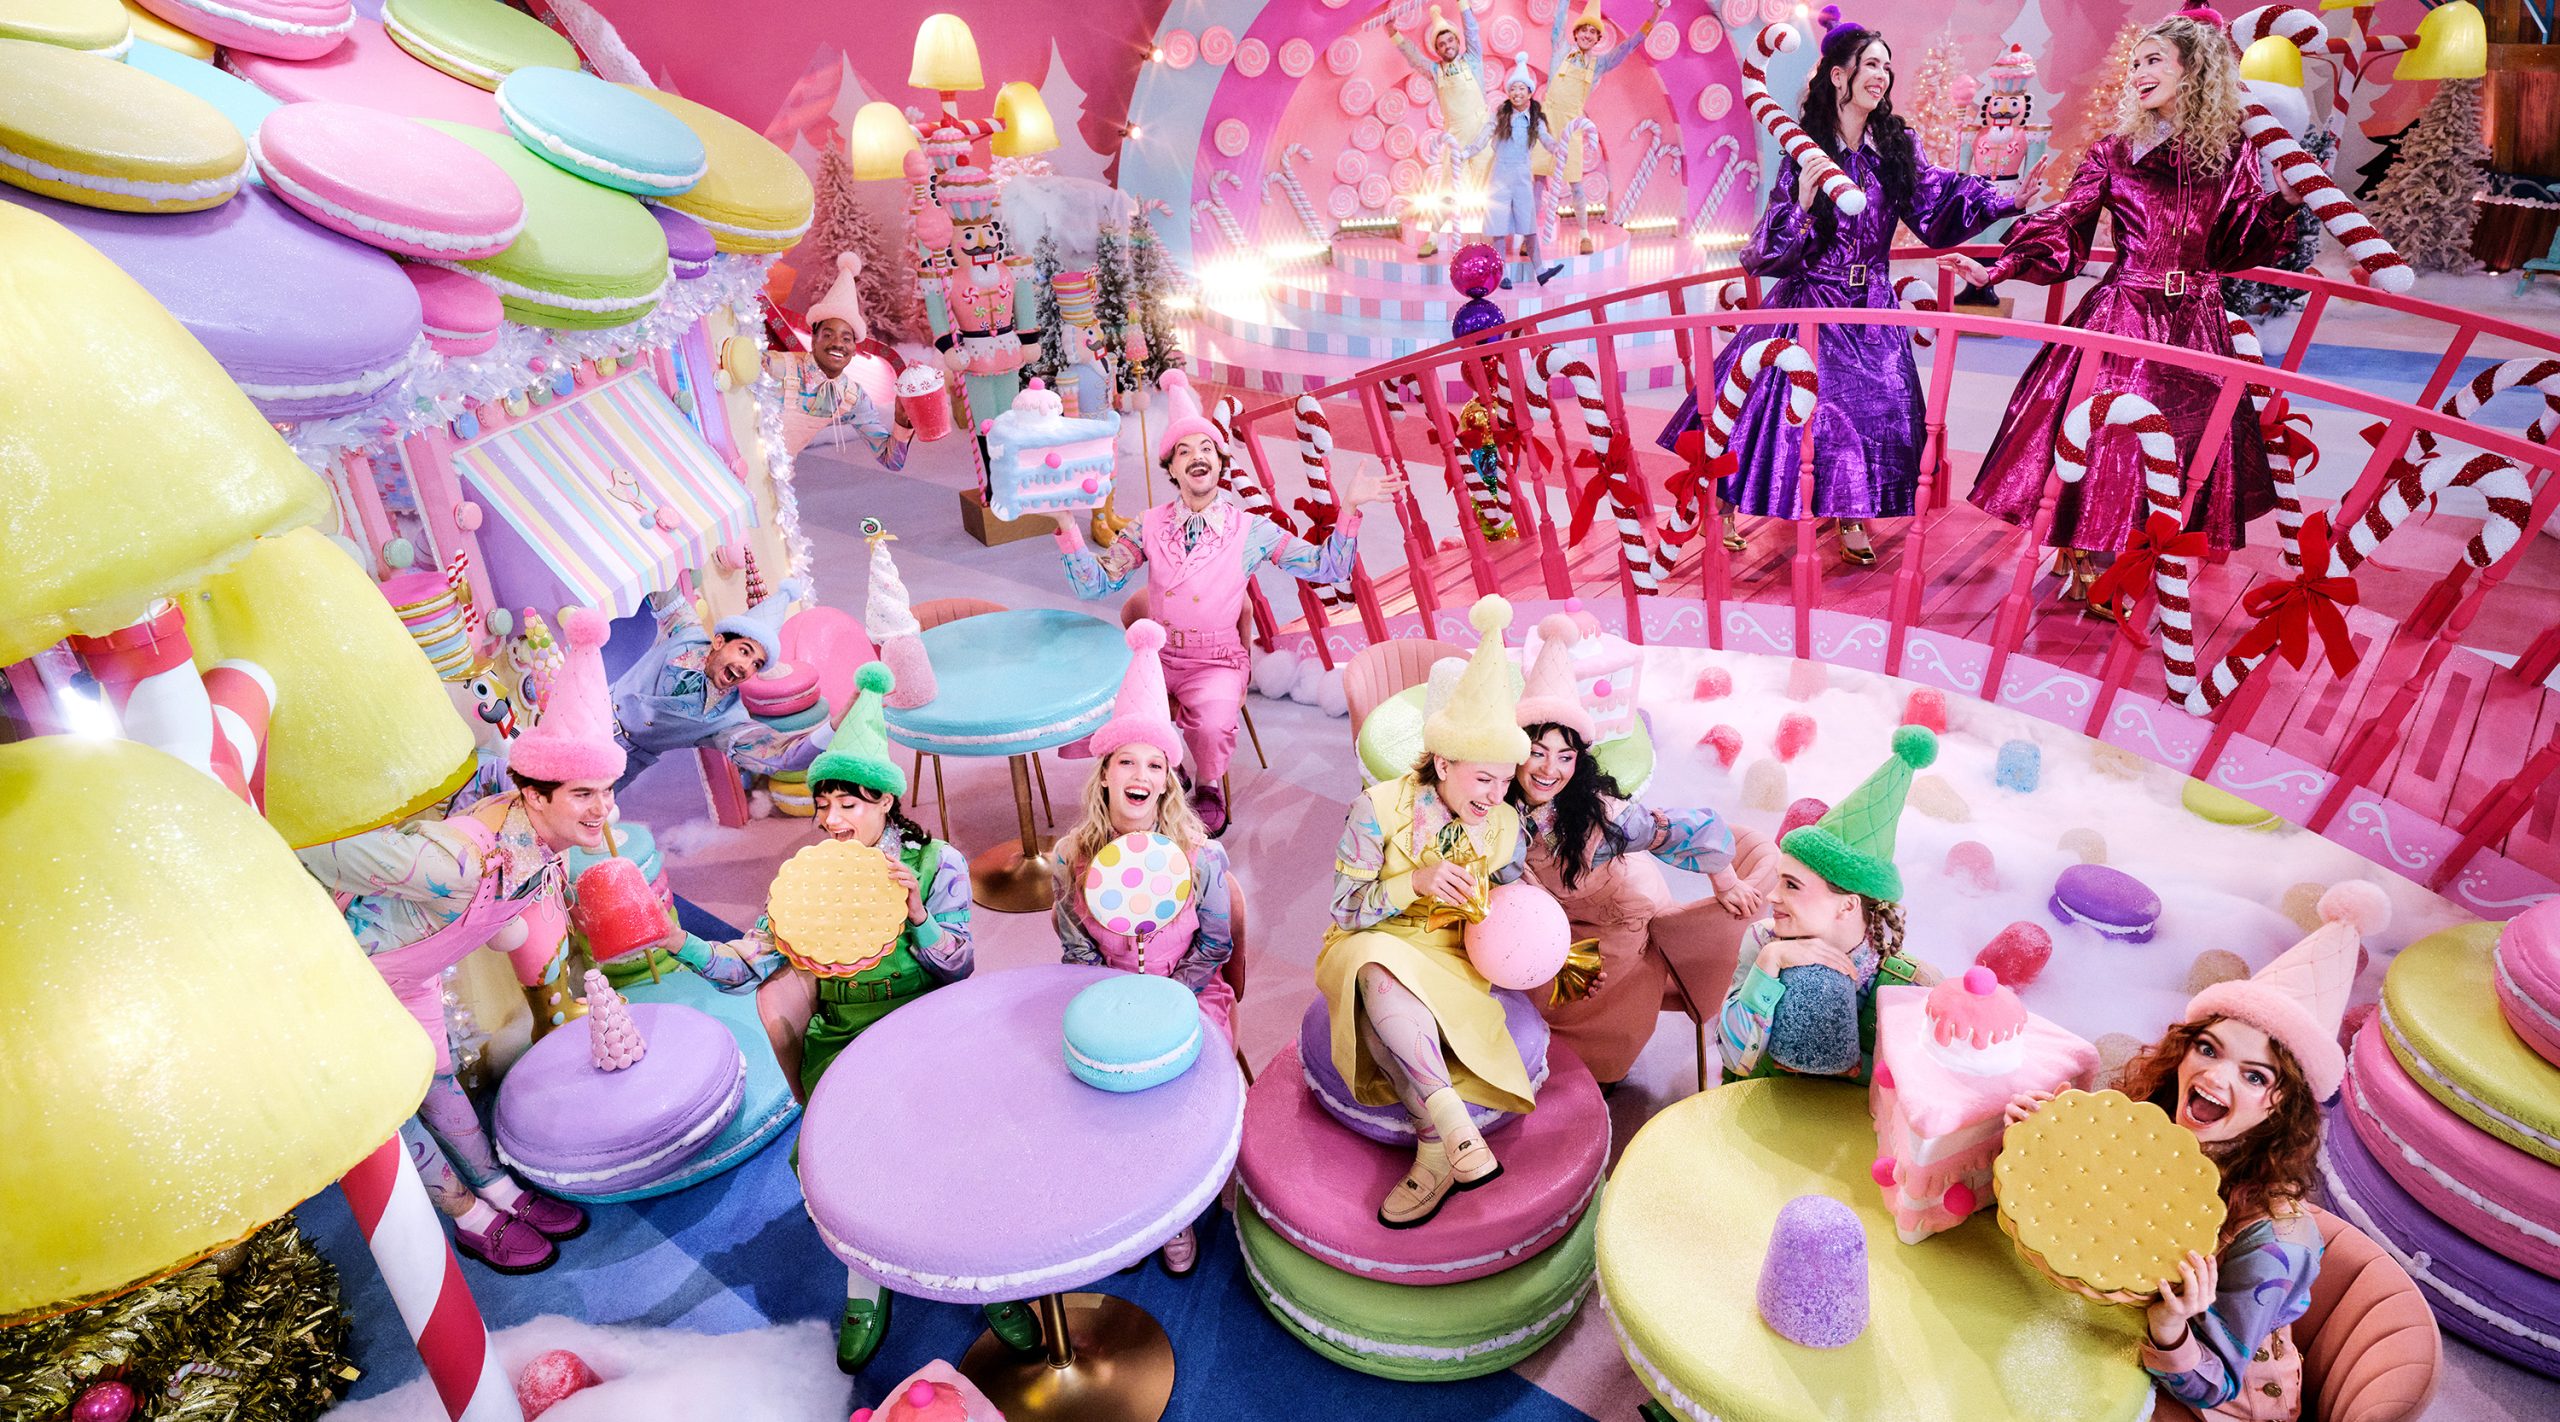 Male and female elves dressed in pastel-colored outfits interact with one another an giant macarons and candy canes in a larger-than-life scene at Hardy's Holiday Village at Nemacolin